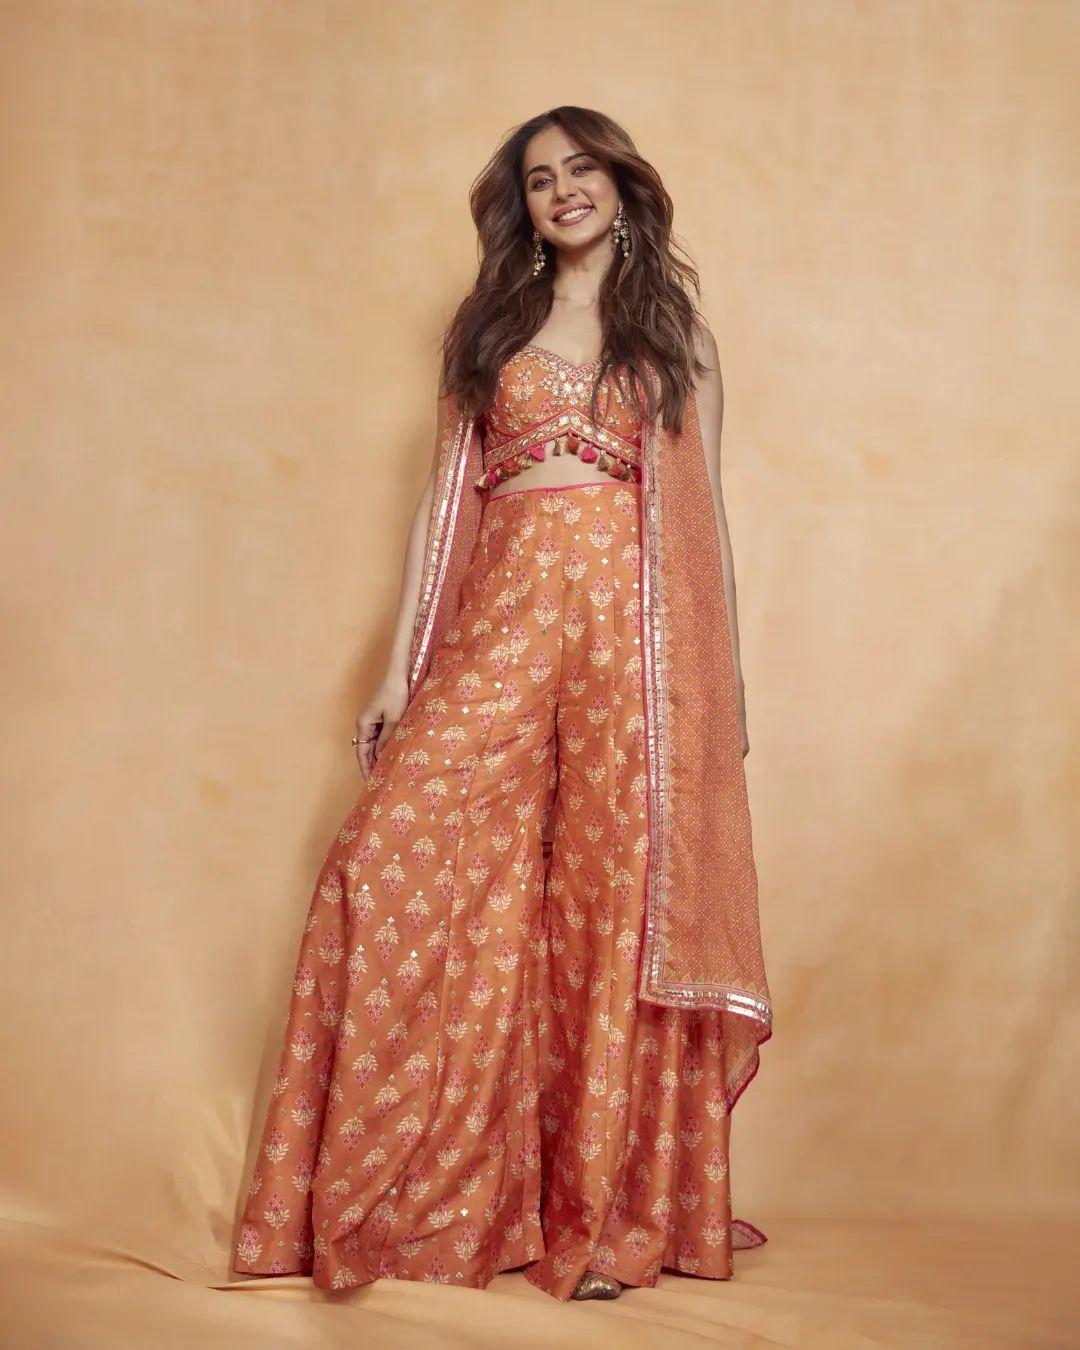 Rakul Preet Singh will be celebrating her first Baisakhi post-marriage. The actress's wardrobe is a perfect place to take inspiration from. In this look, Rakul wore a beautiful orange blouse paired with matching palazzos. The actress put a sheer shrug on it, which made her dress look balanced